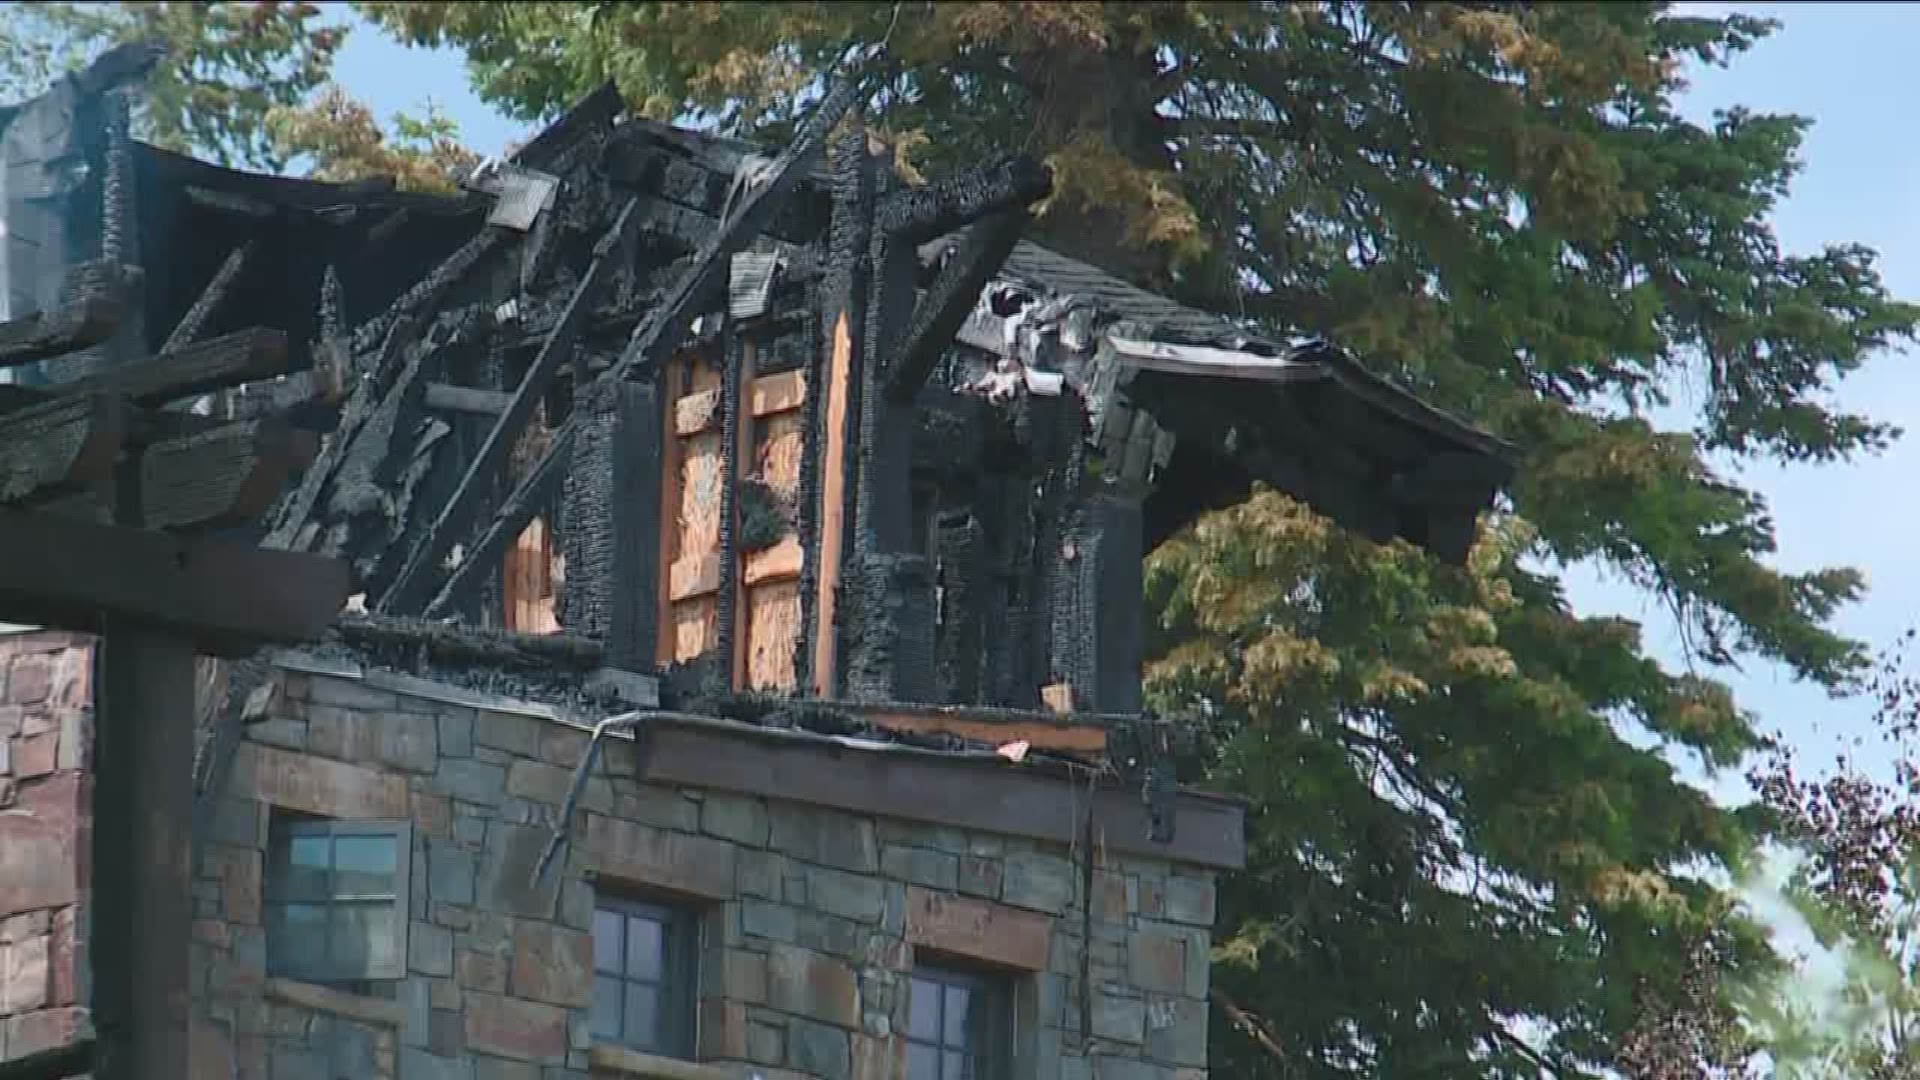 The state fire marshal gives KTVB the latest on the investigation into a cabin fire that killed four people.